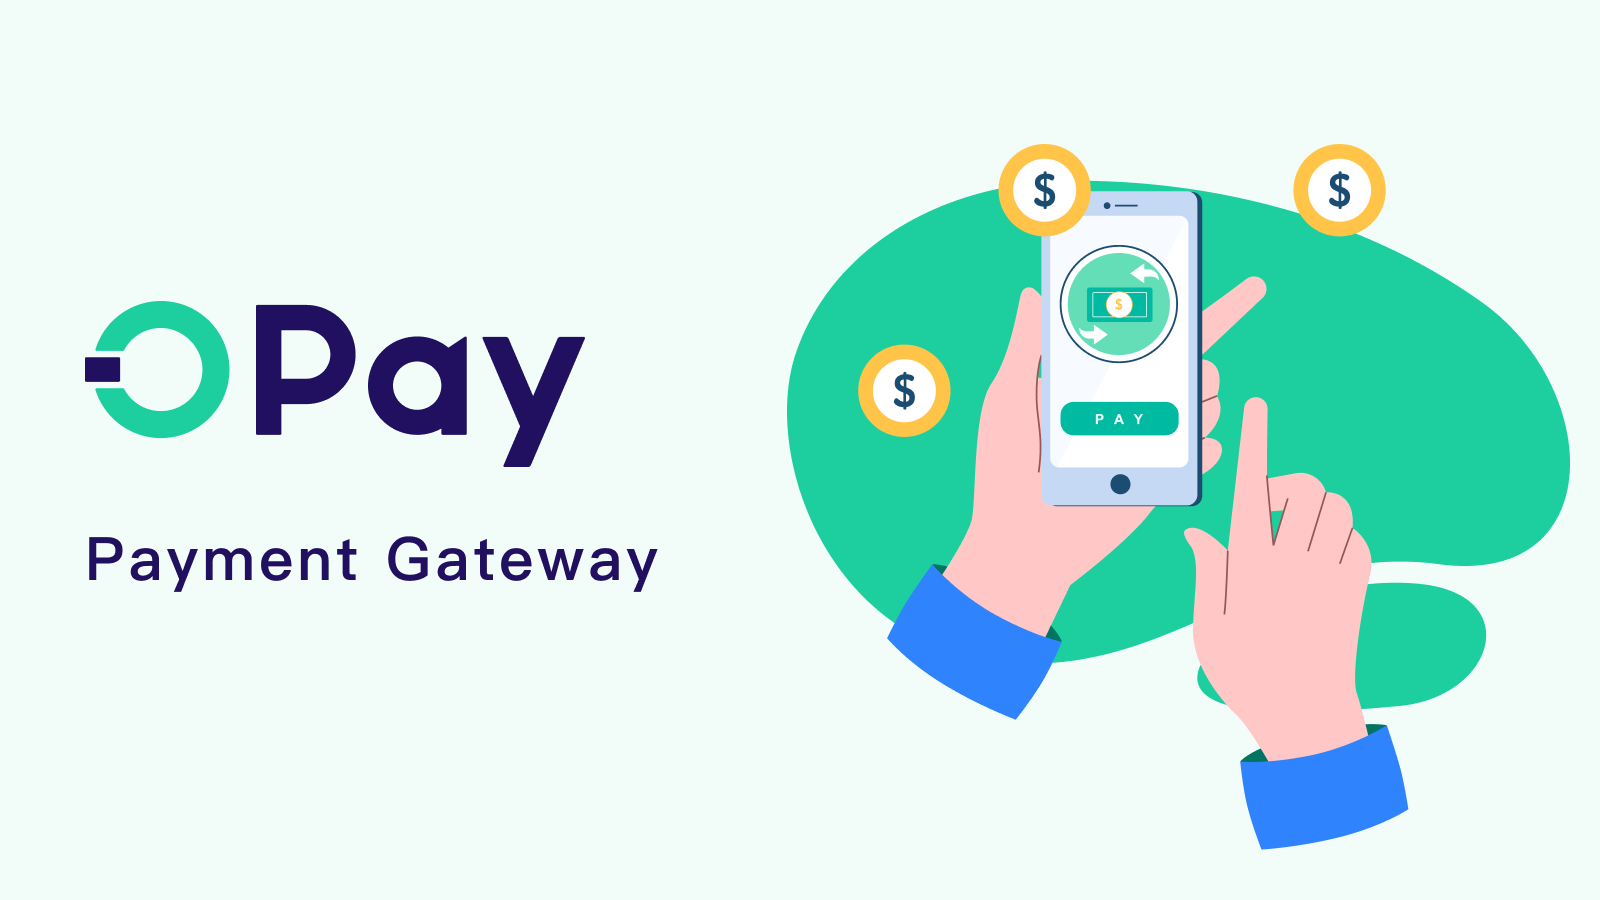 OPay provide a simple, fast and secure payment experience 